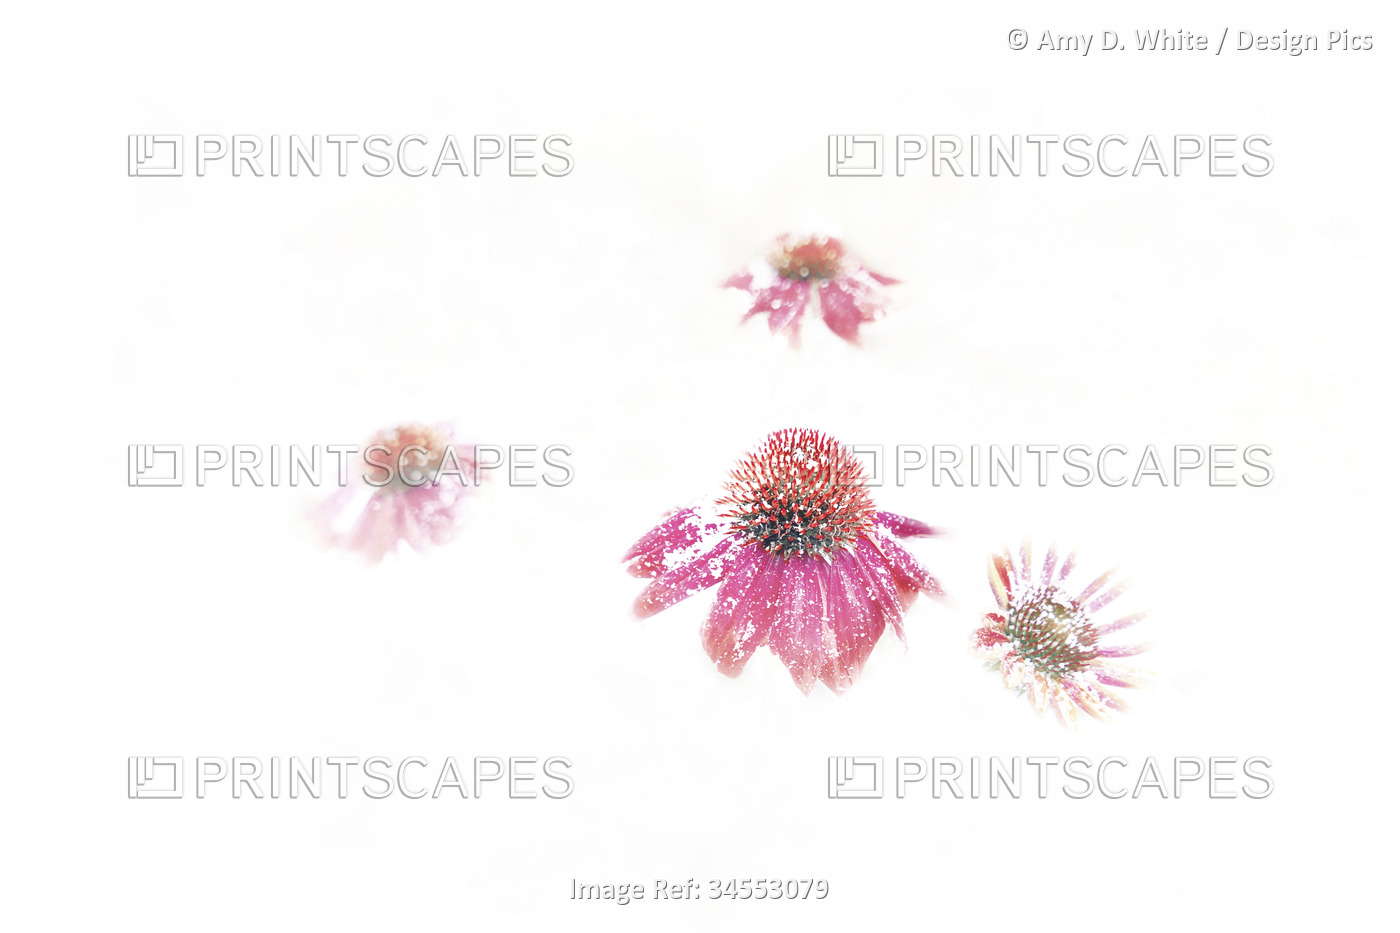 Snow-dusted Echinacea blossoms emerge from a bright white background; ...